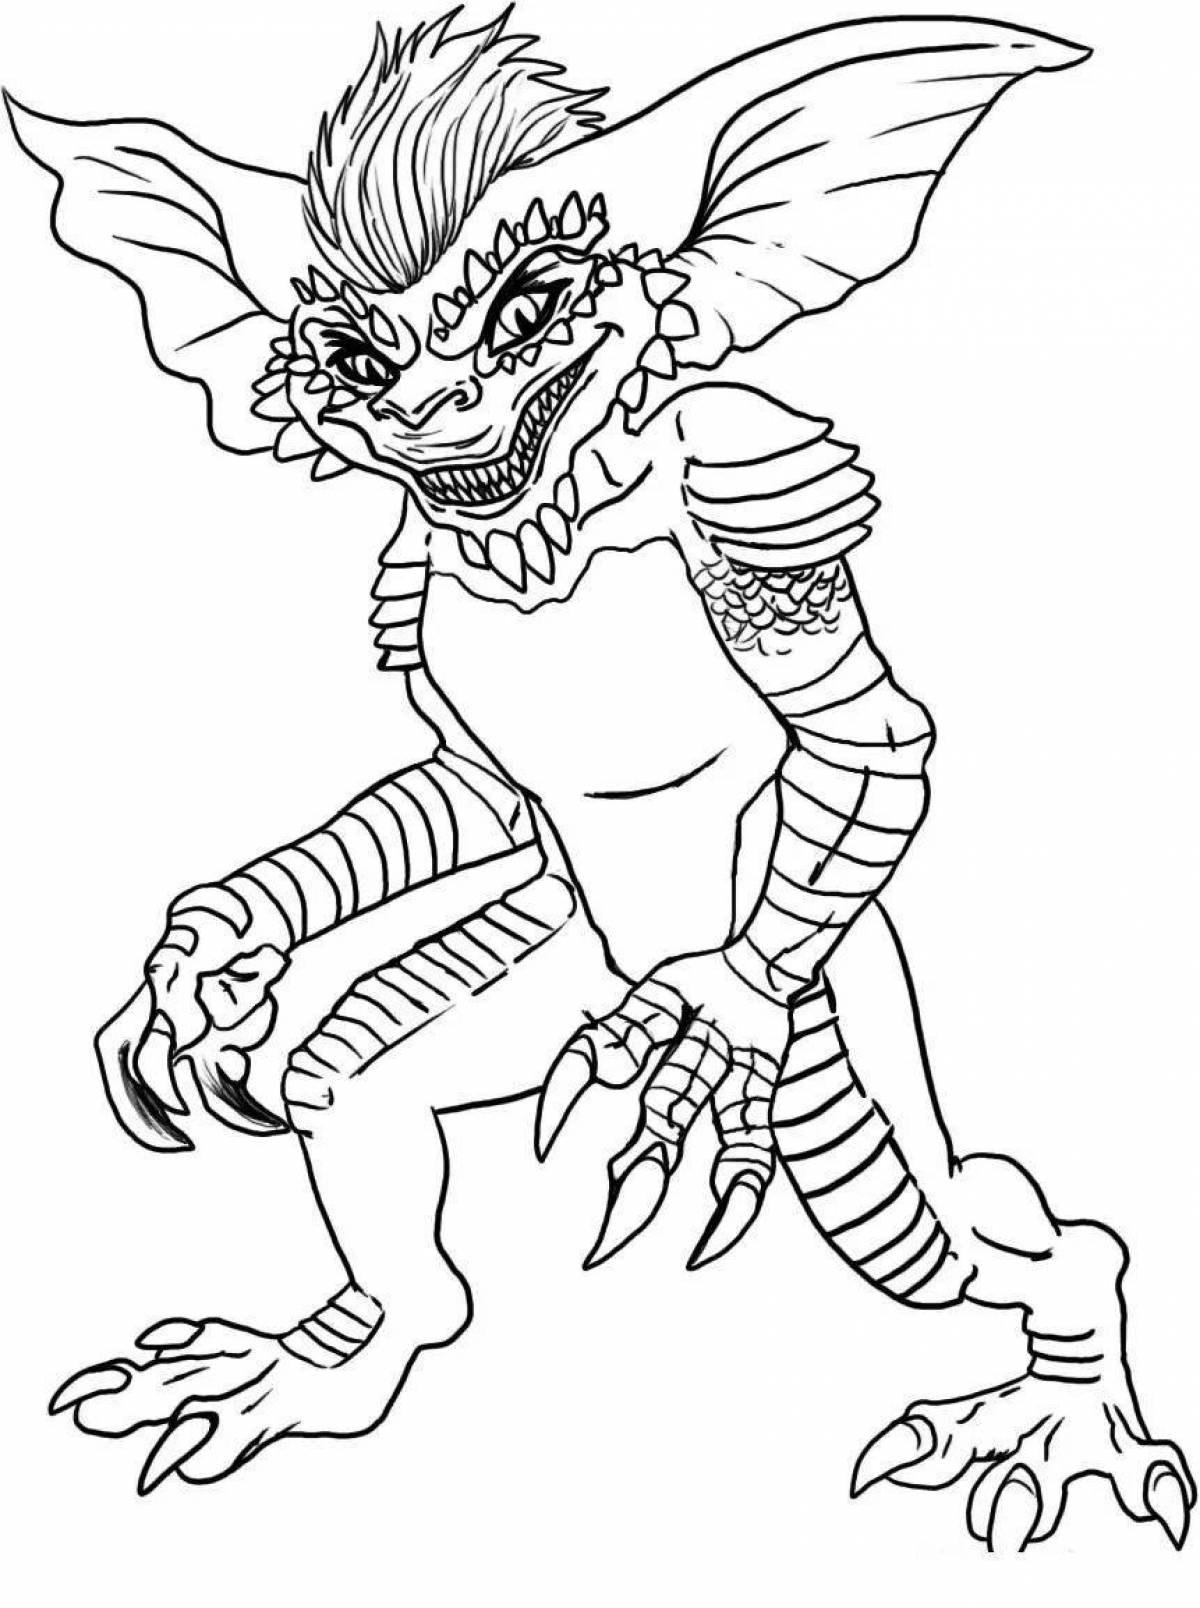 Cute animal coloring page